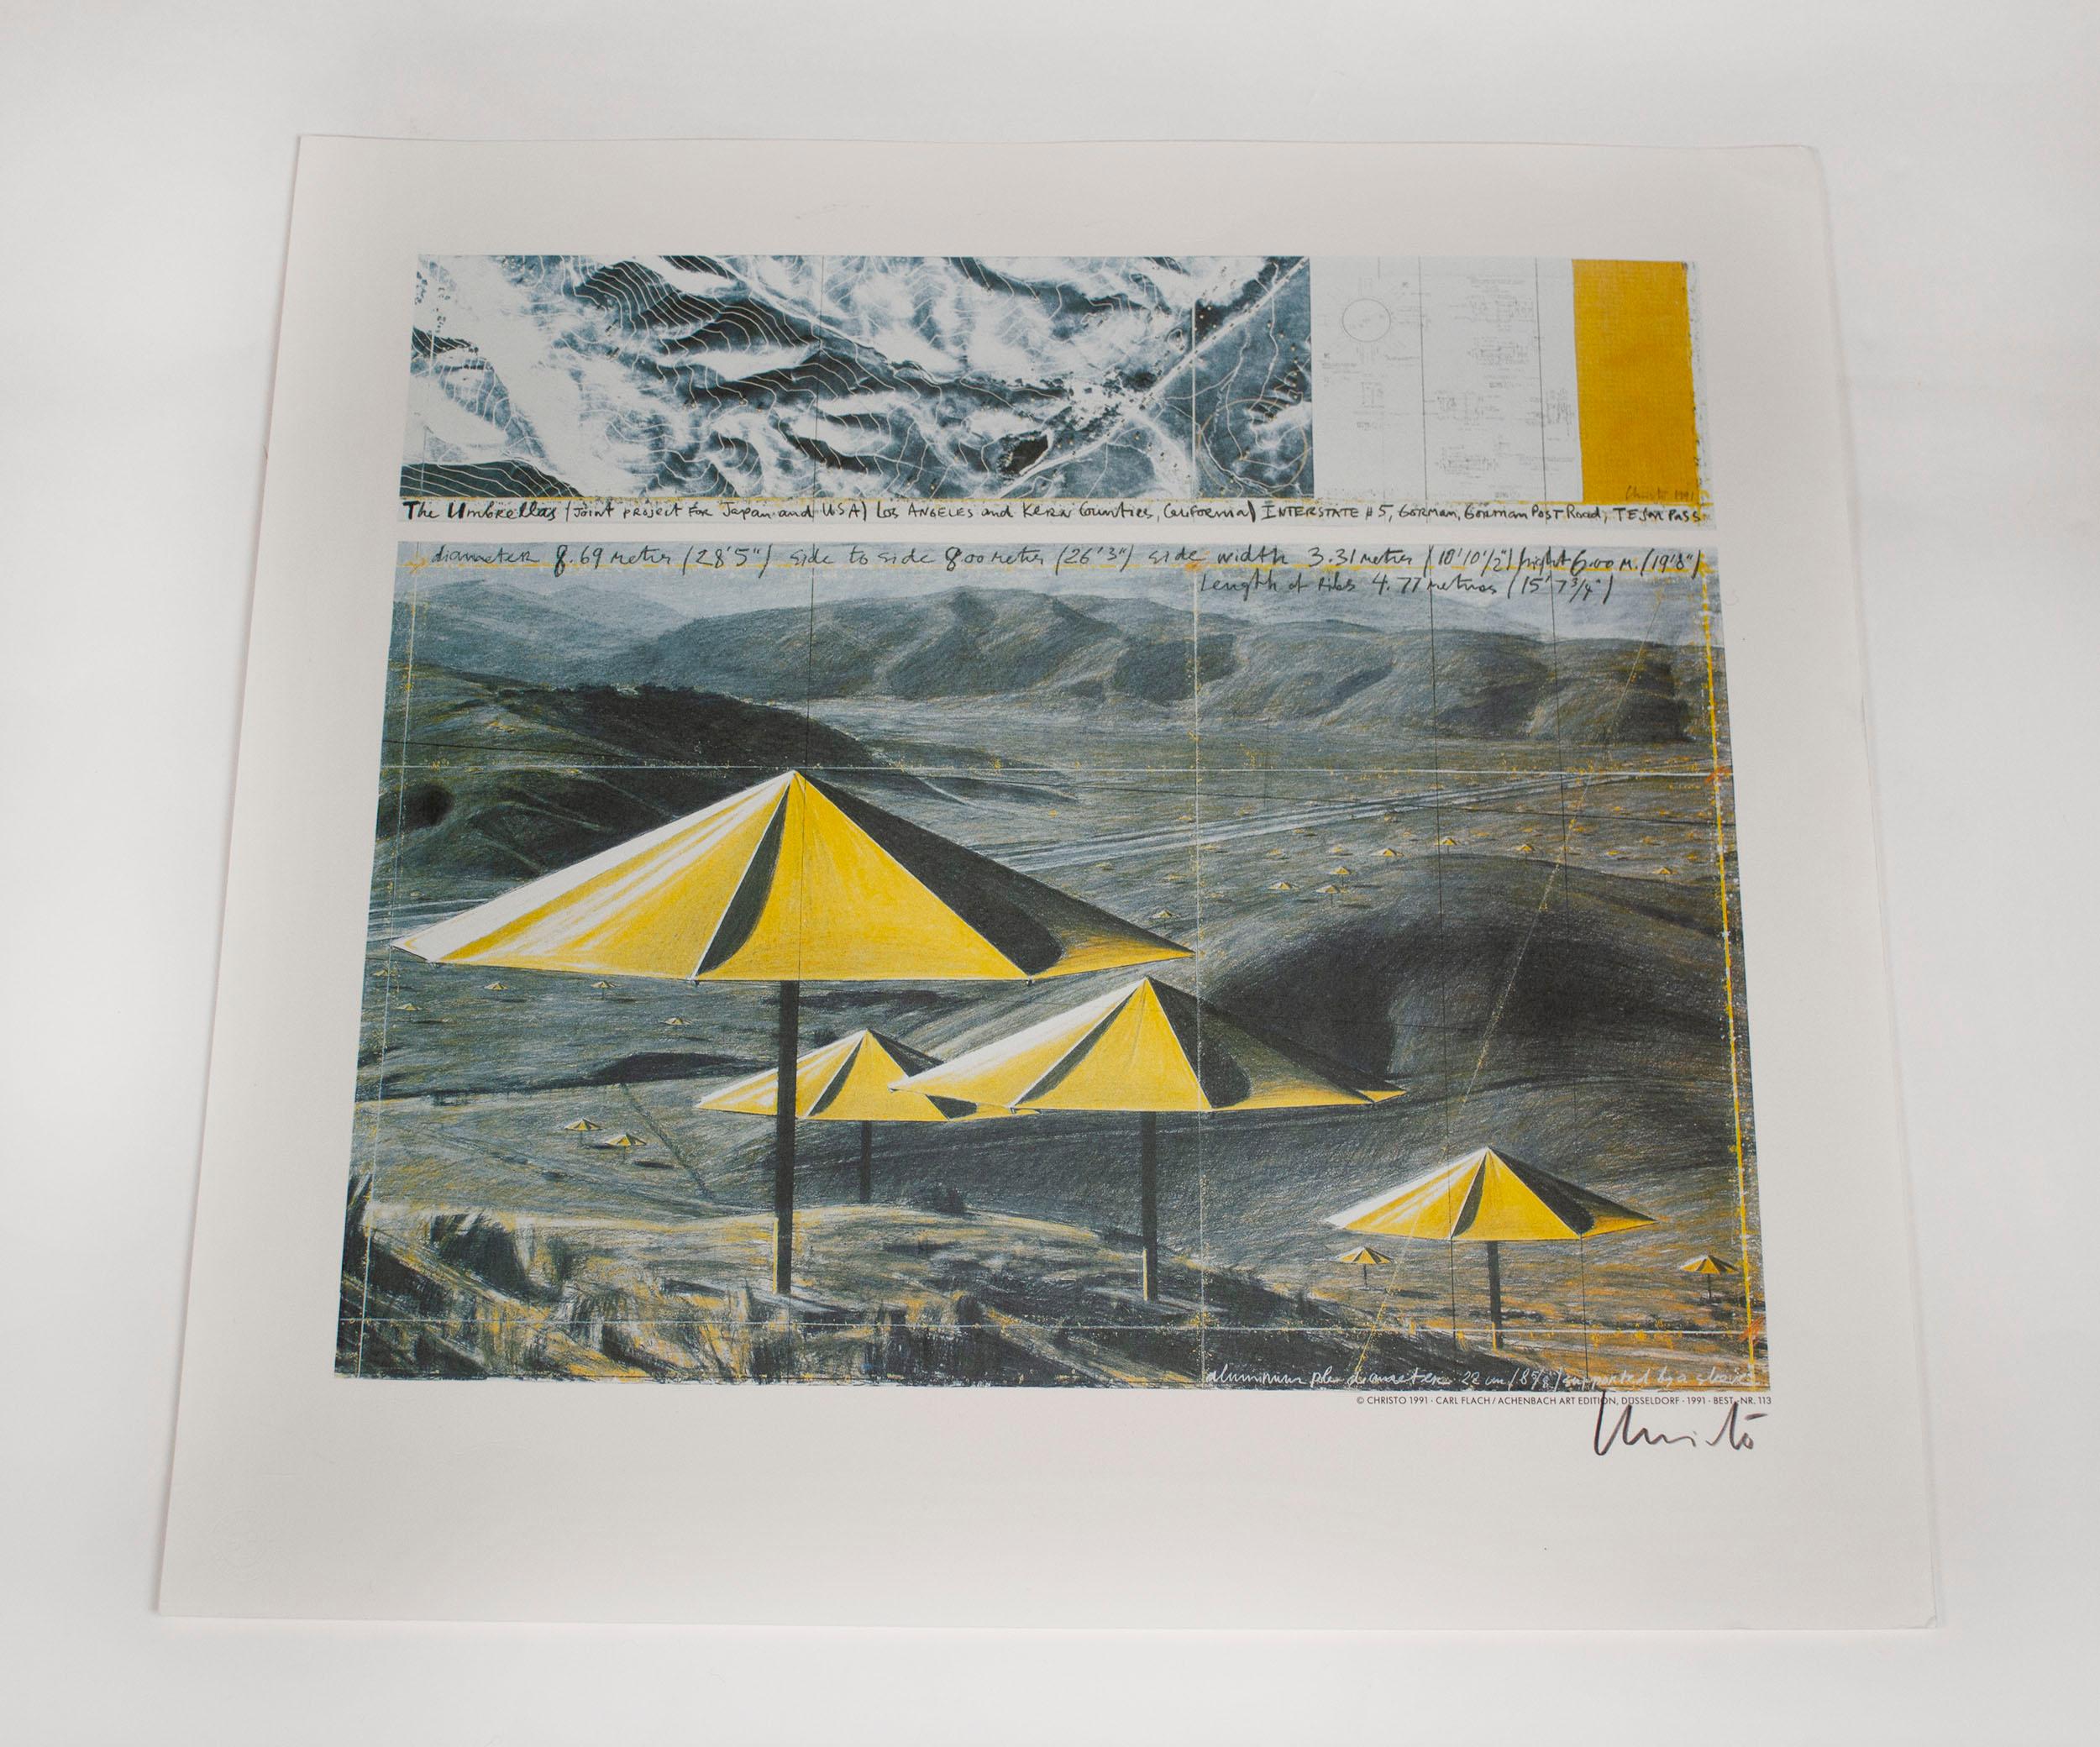 Offset print in colors on paper
Christo (born 1935) – Bulgarian artist
Jeanne-Claude (1935-2009) – Moroccan-French artist
Signed 'Christo' in pencil
Published by Carl Flach / Achenbach Art Edition, Düsseldorf 1991
Printed by Domberger (with